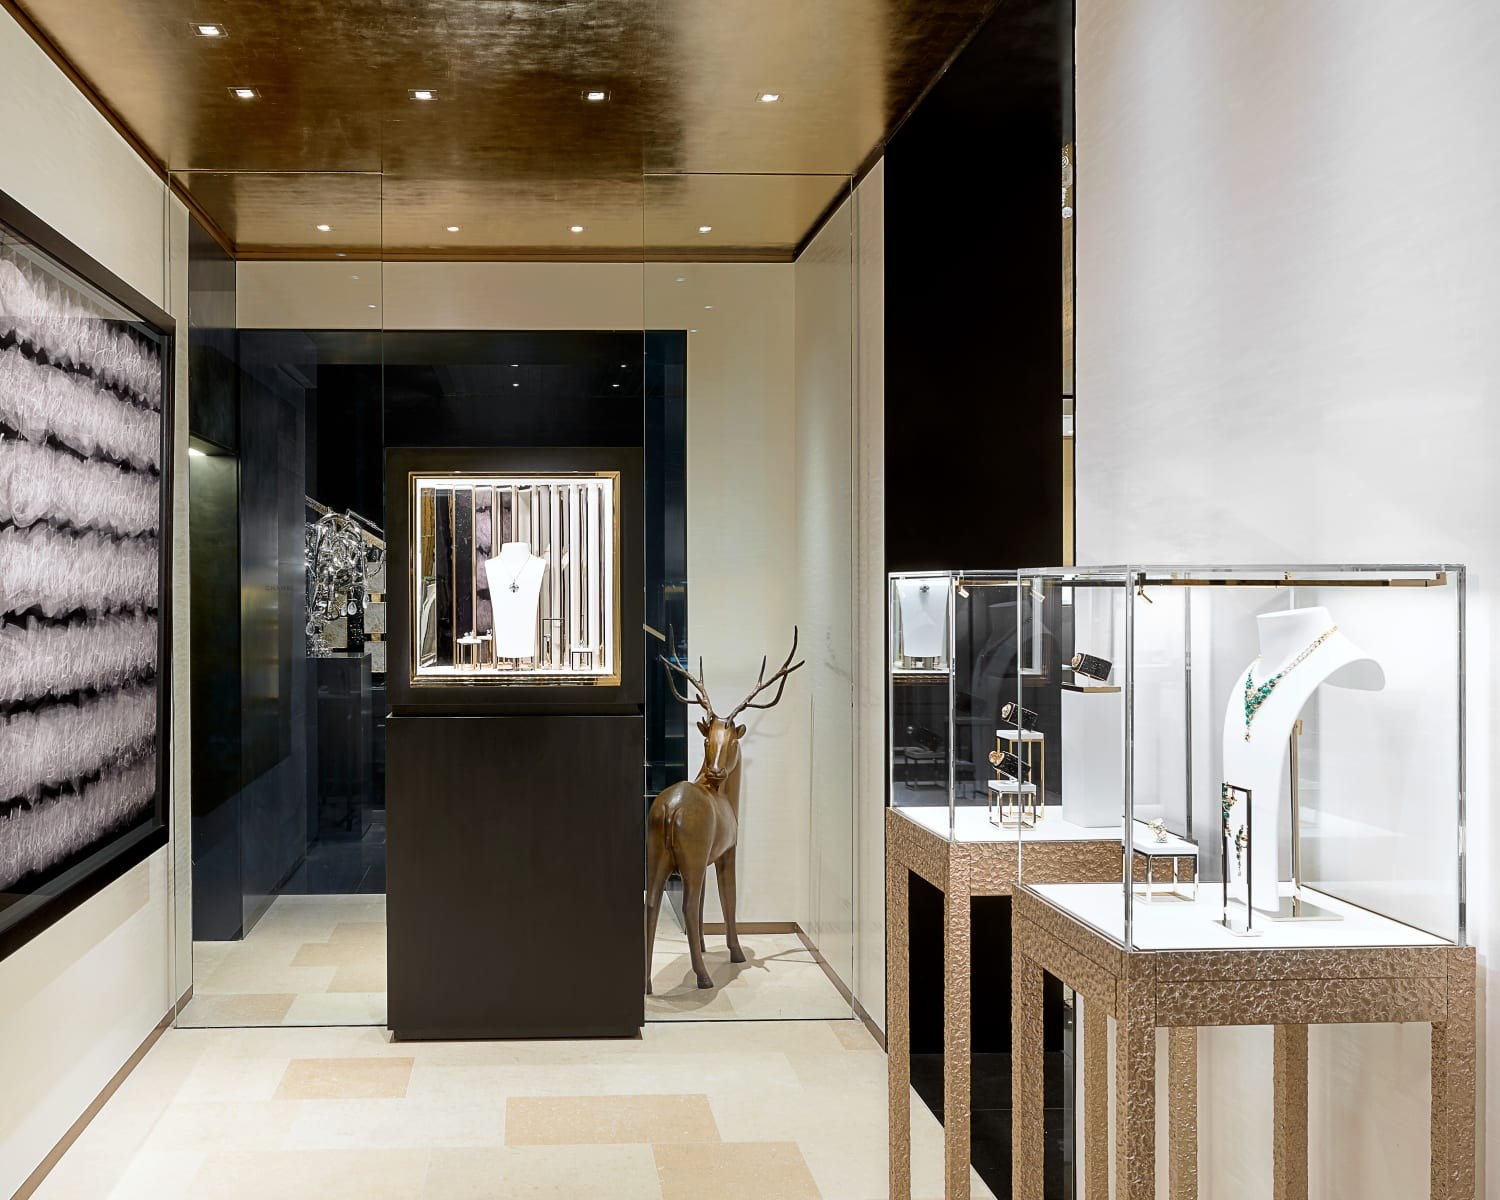 Peter Marino on delivering the luxury goods at Place Vendôme